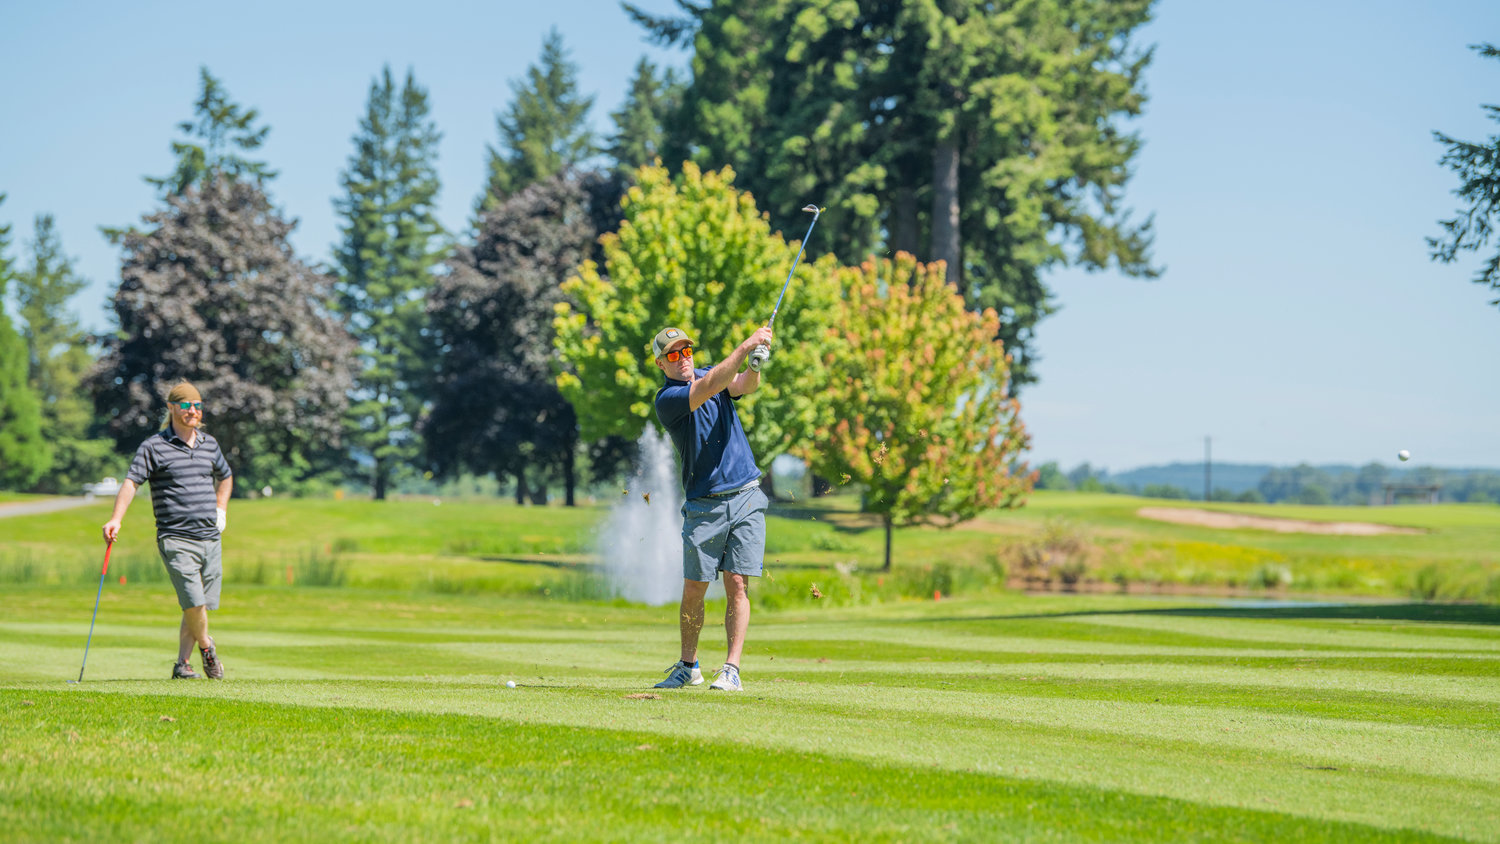 Aaron Van Tuyl makes contact as he swings his club during a charity golf tournament at Riverside Golf Course in Chehalis on Friday.